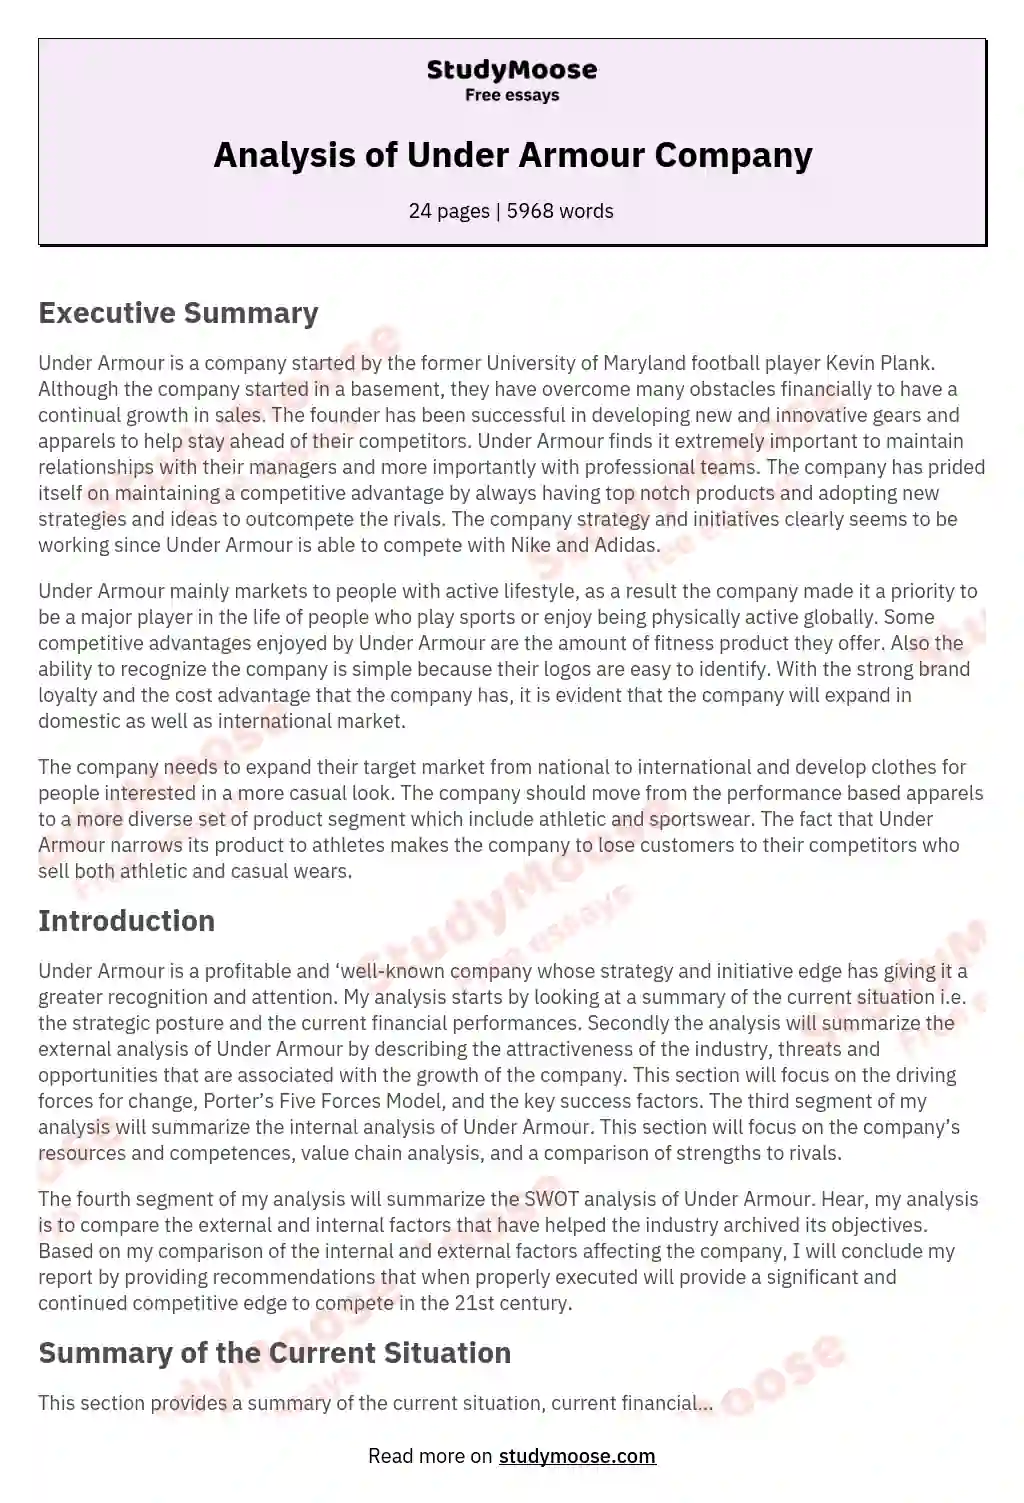 Analysis of Under Armour Company essay